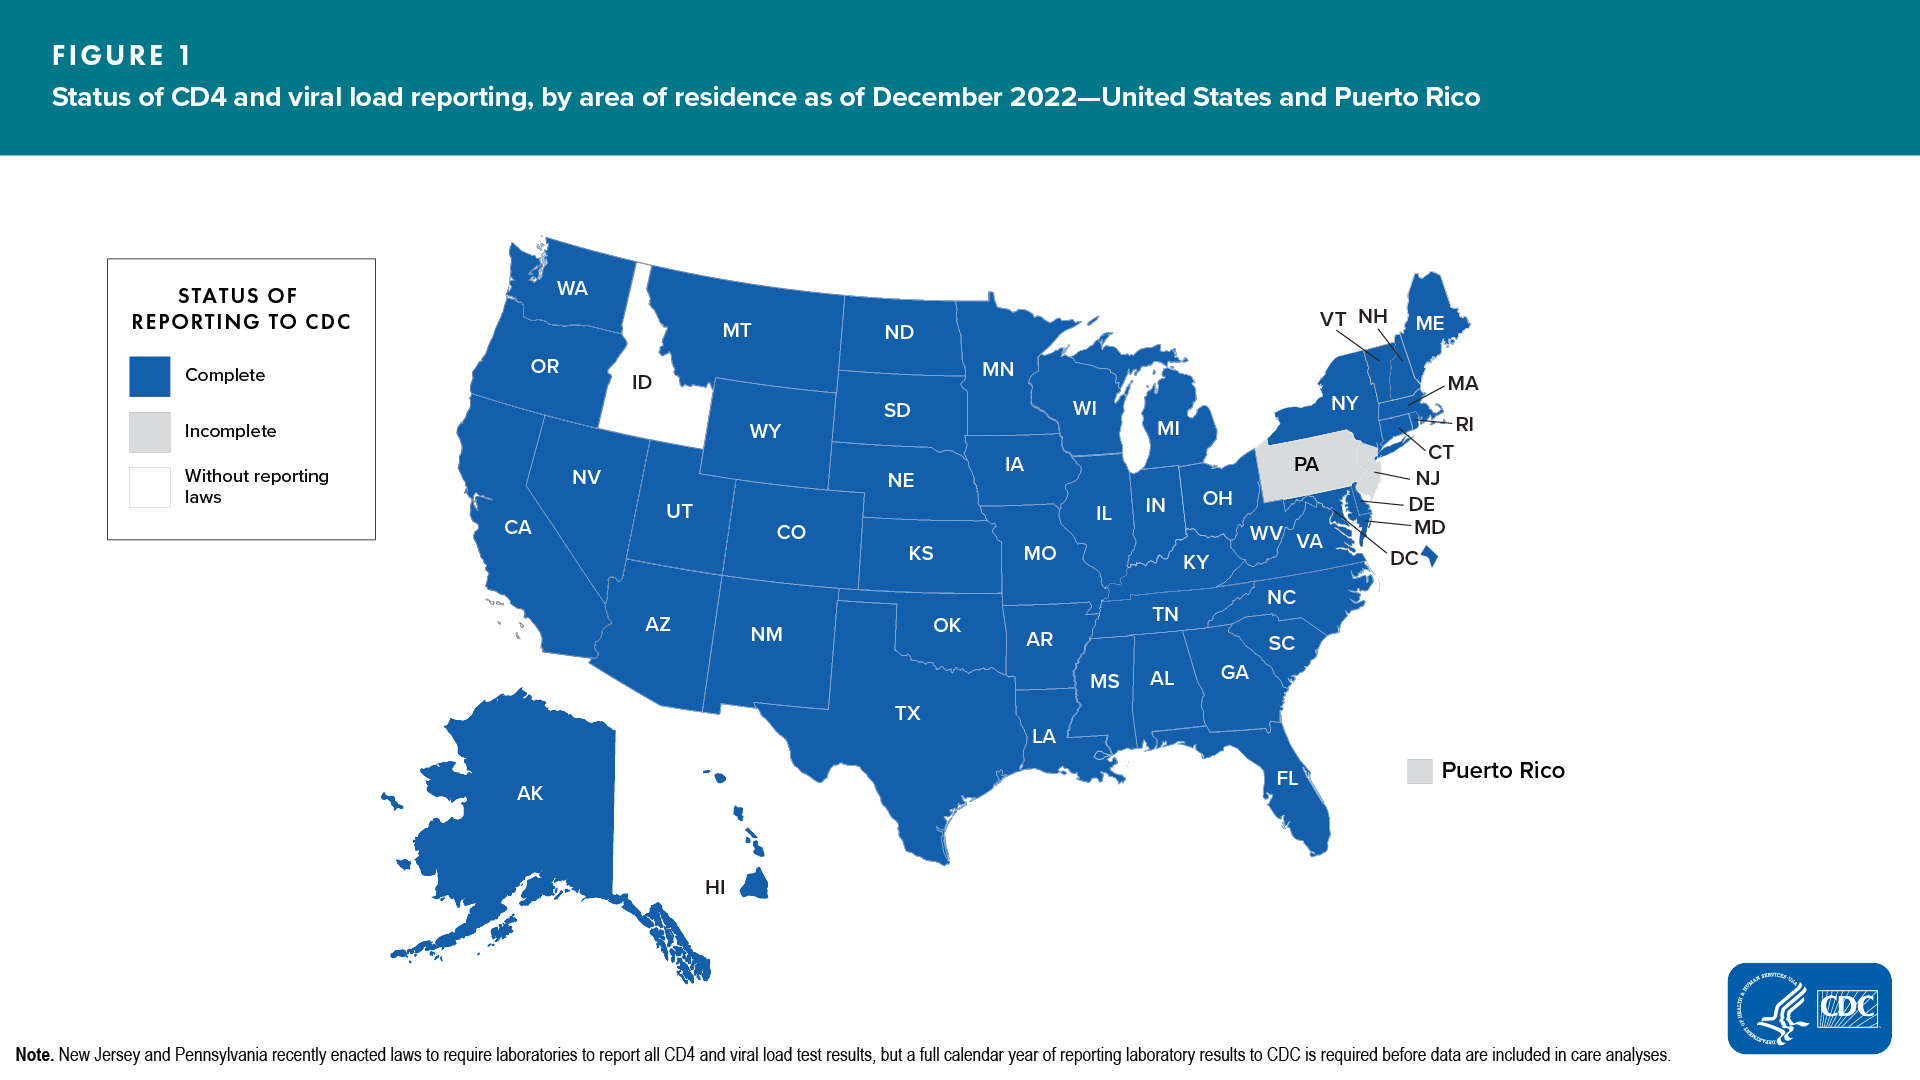 Figure 1. Status of CD4 and viral load reporting, by area of residence as of December 2022 — United States and Puerto Rico